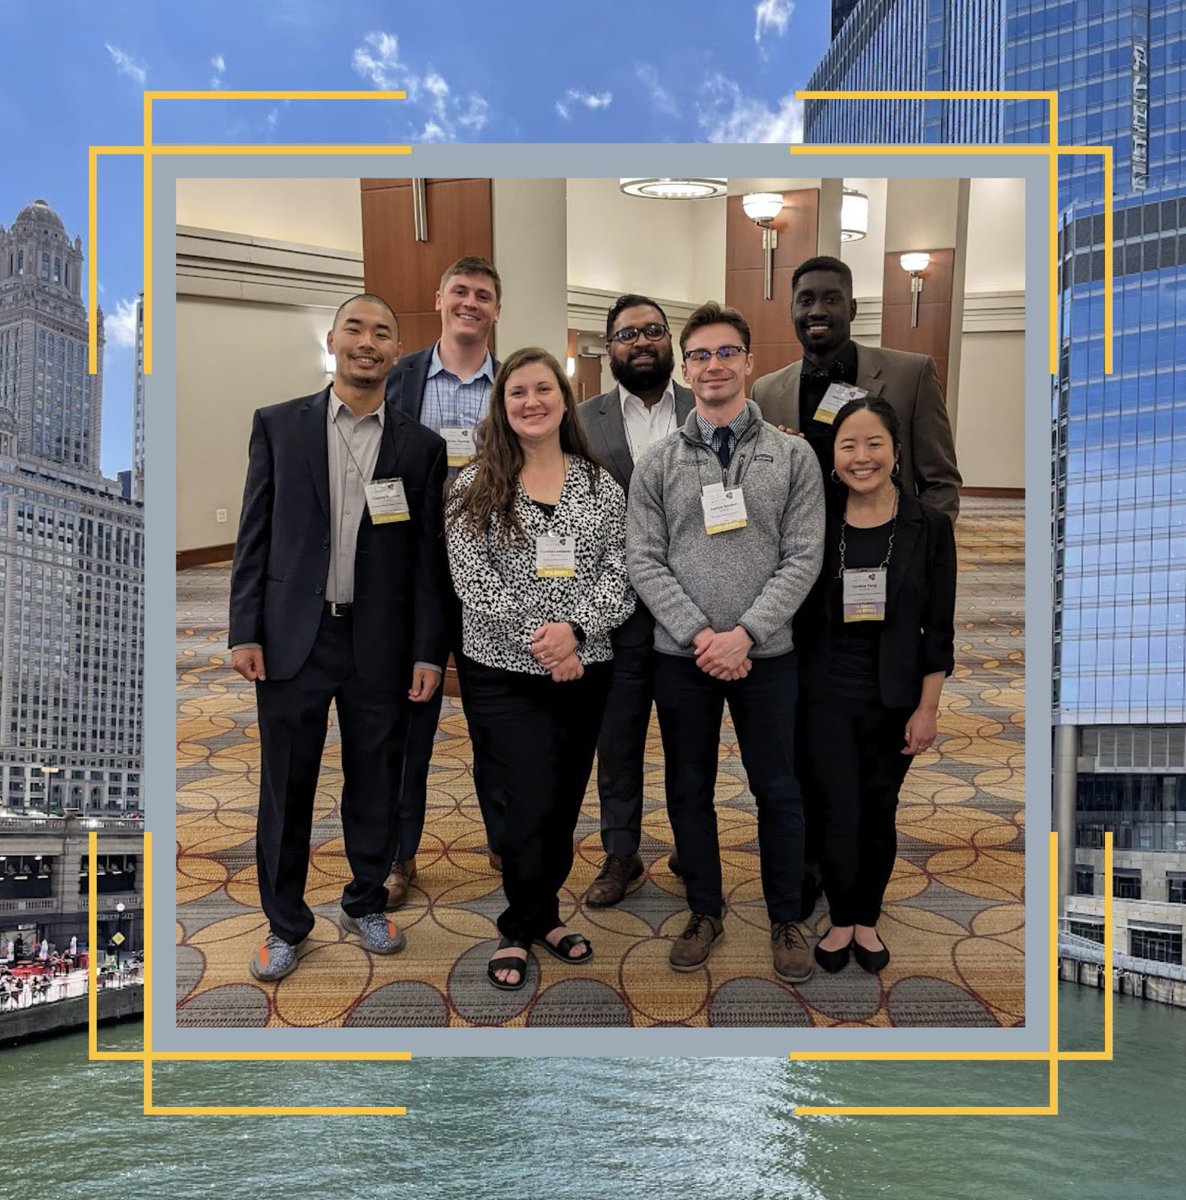 Members of our Mizzou APSA chapter attended the @JointMeeting held by @A_P_S_A , AAP, and @the_asci this past weekend in Chicago! We are proud to represent the Mizzou MD-PhD program at the national level, and we look forward to next year’s meeting! #mdphd #doubledocs